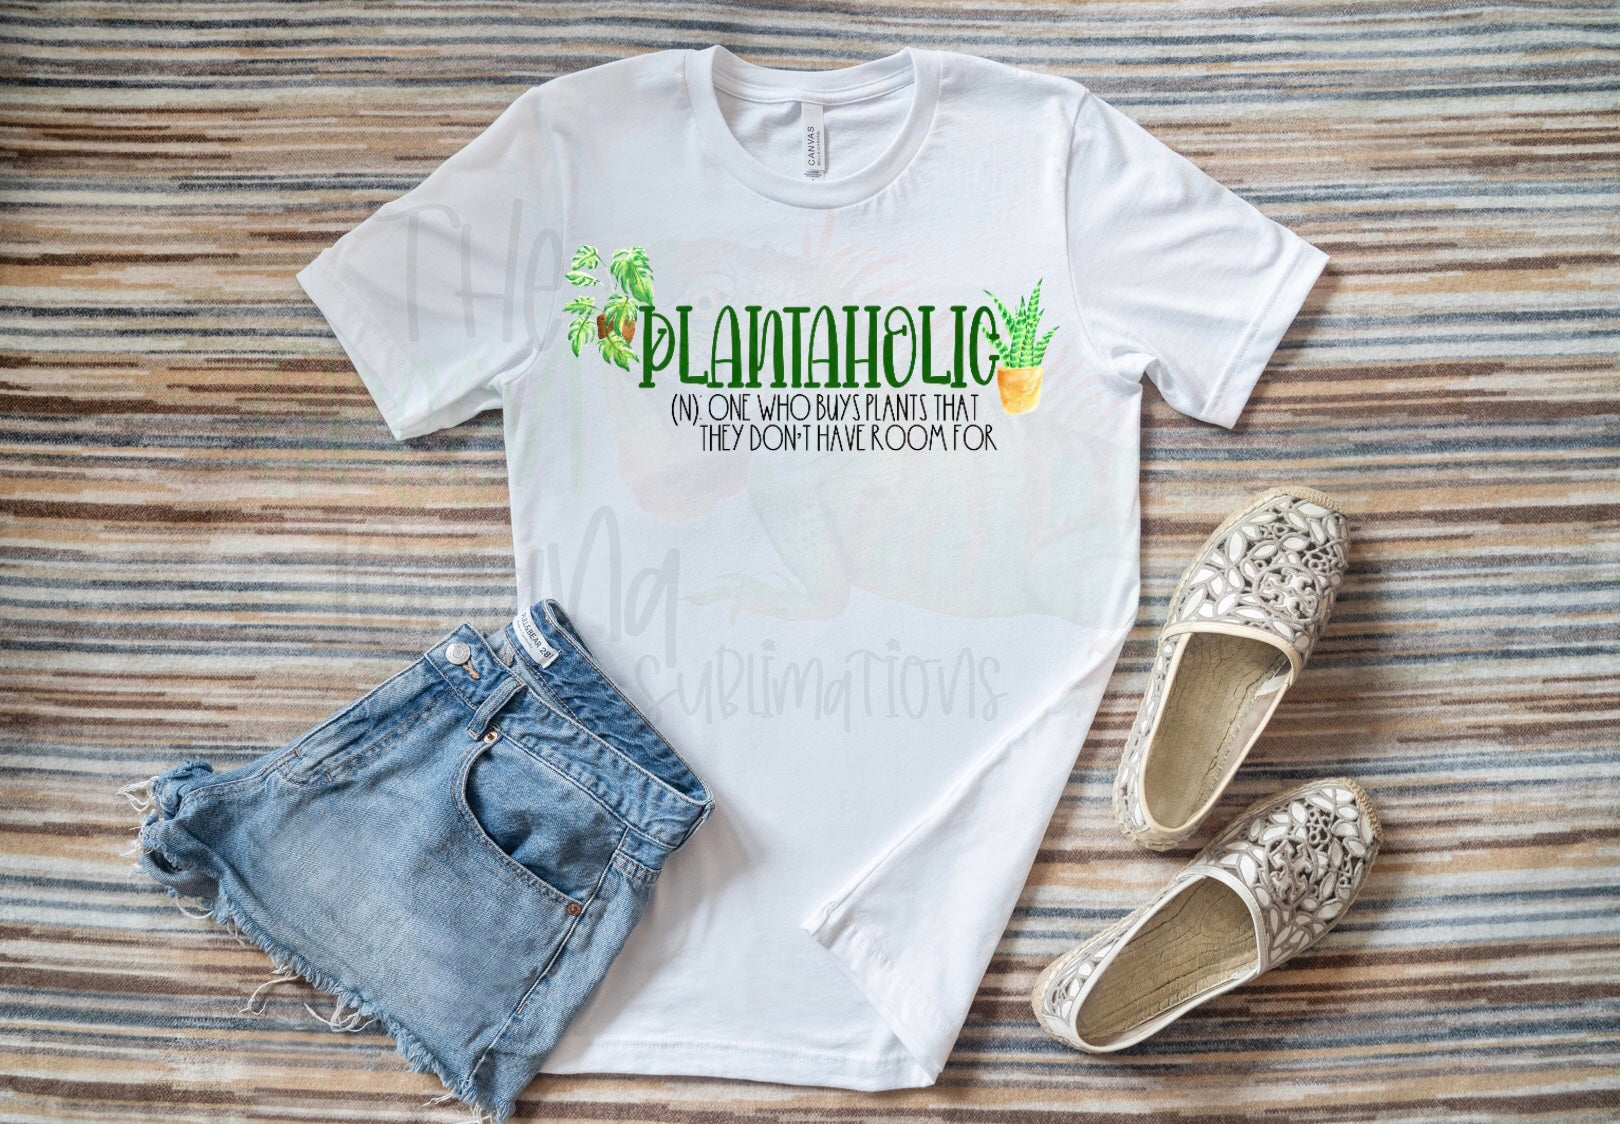 Plantaholic. One who buys plants that they don’t have room for.